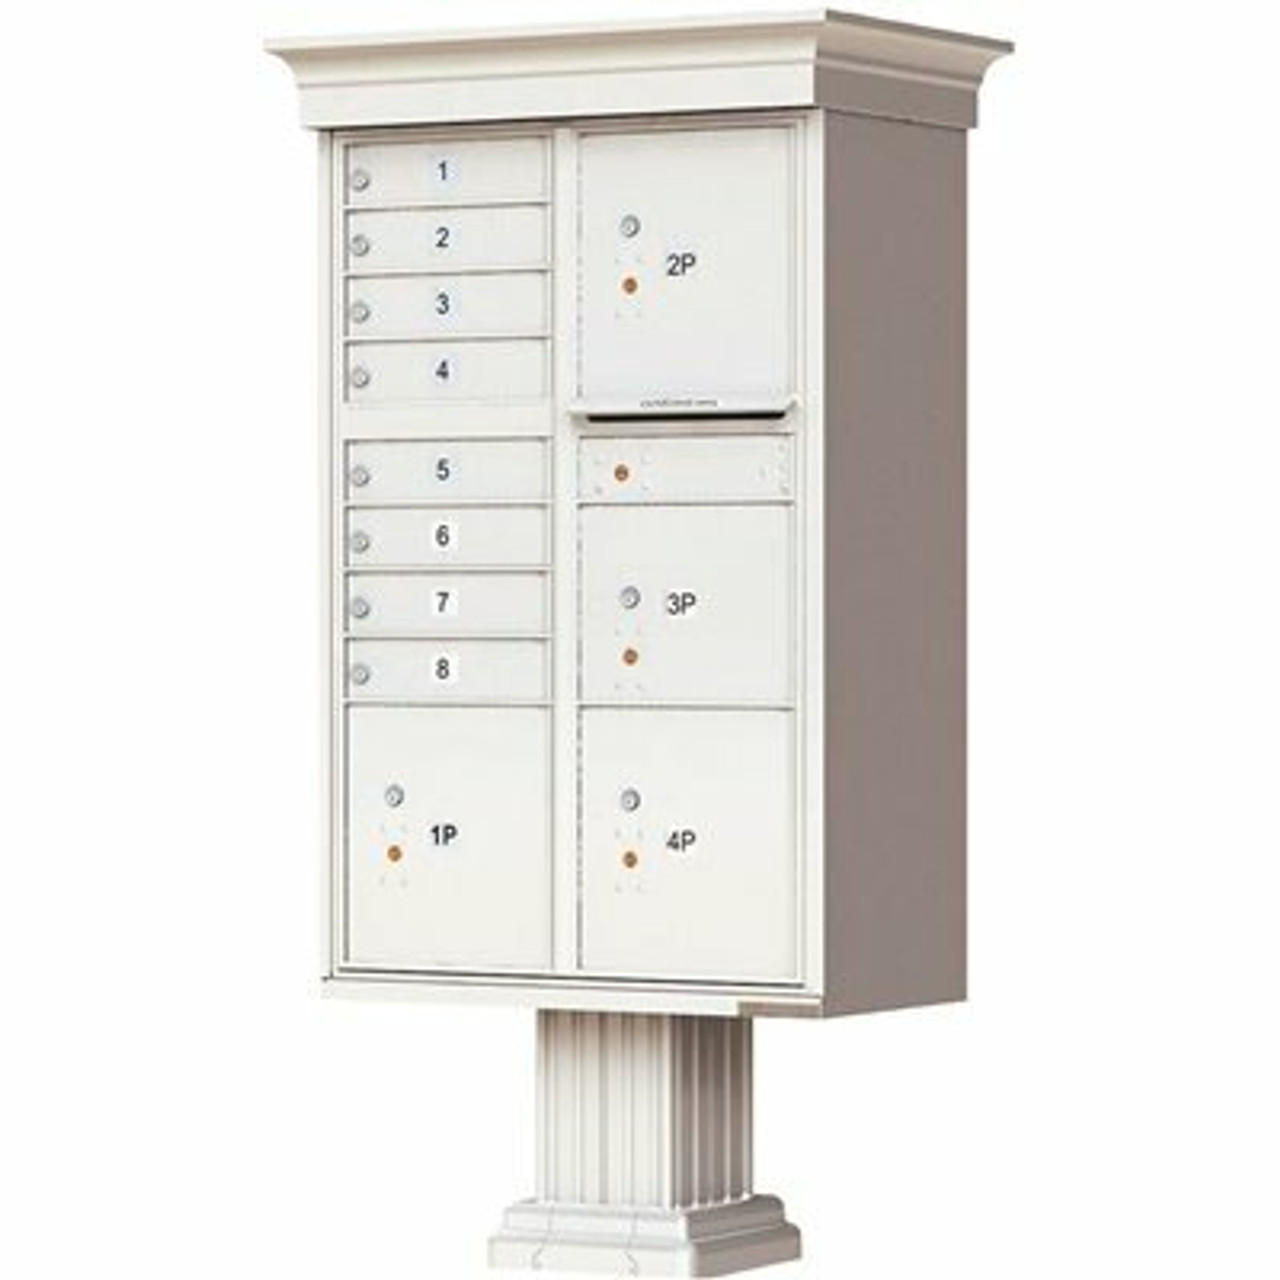 Florence 1570 Series 8-Mailboxes, 1-Outgoing, 4-Parcel Lockers, Vital Cluster Box Unit With Vogue Classic Accessories - 2474380